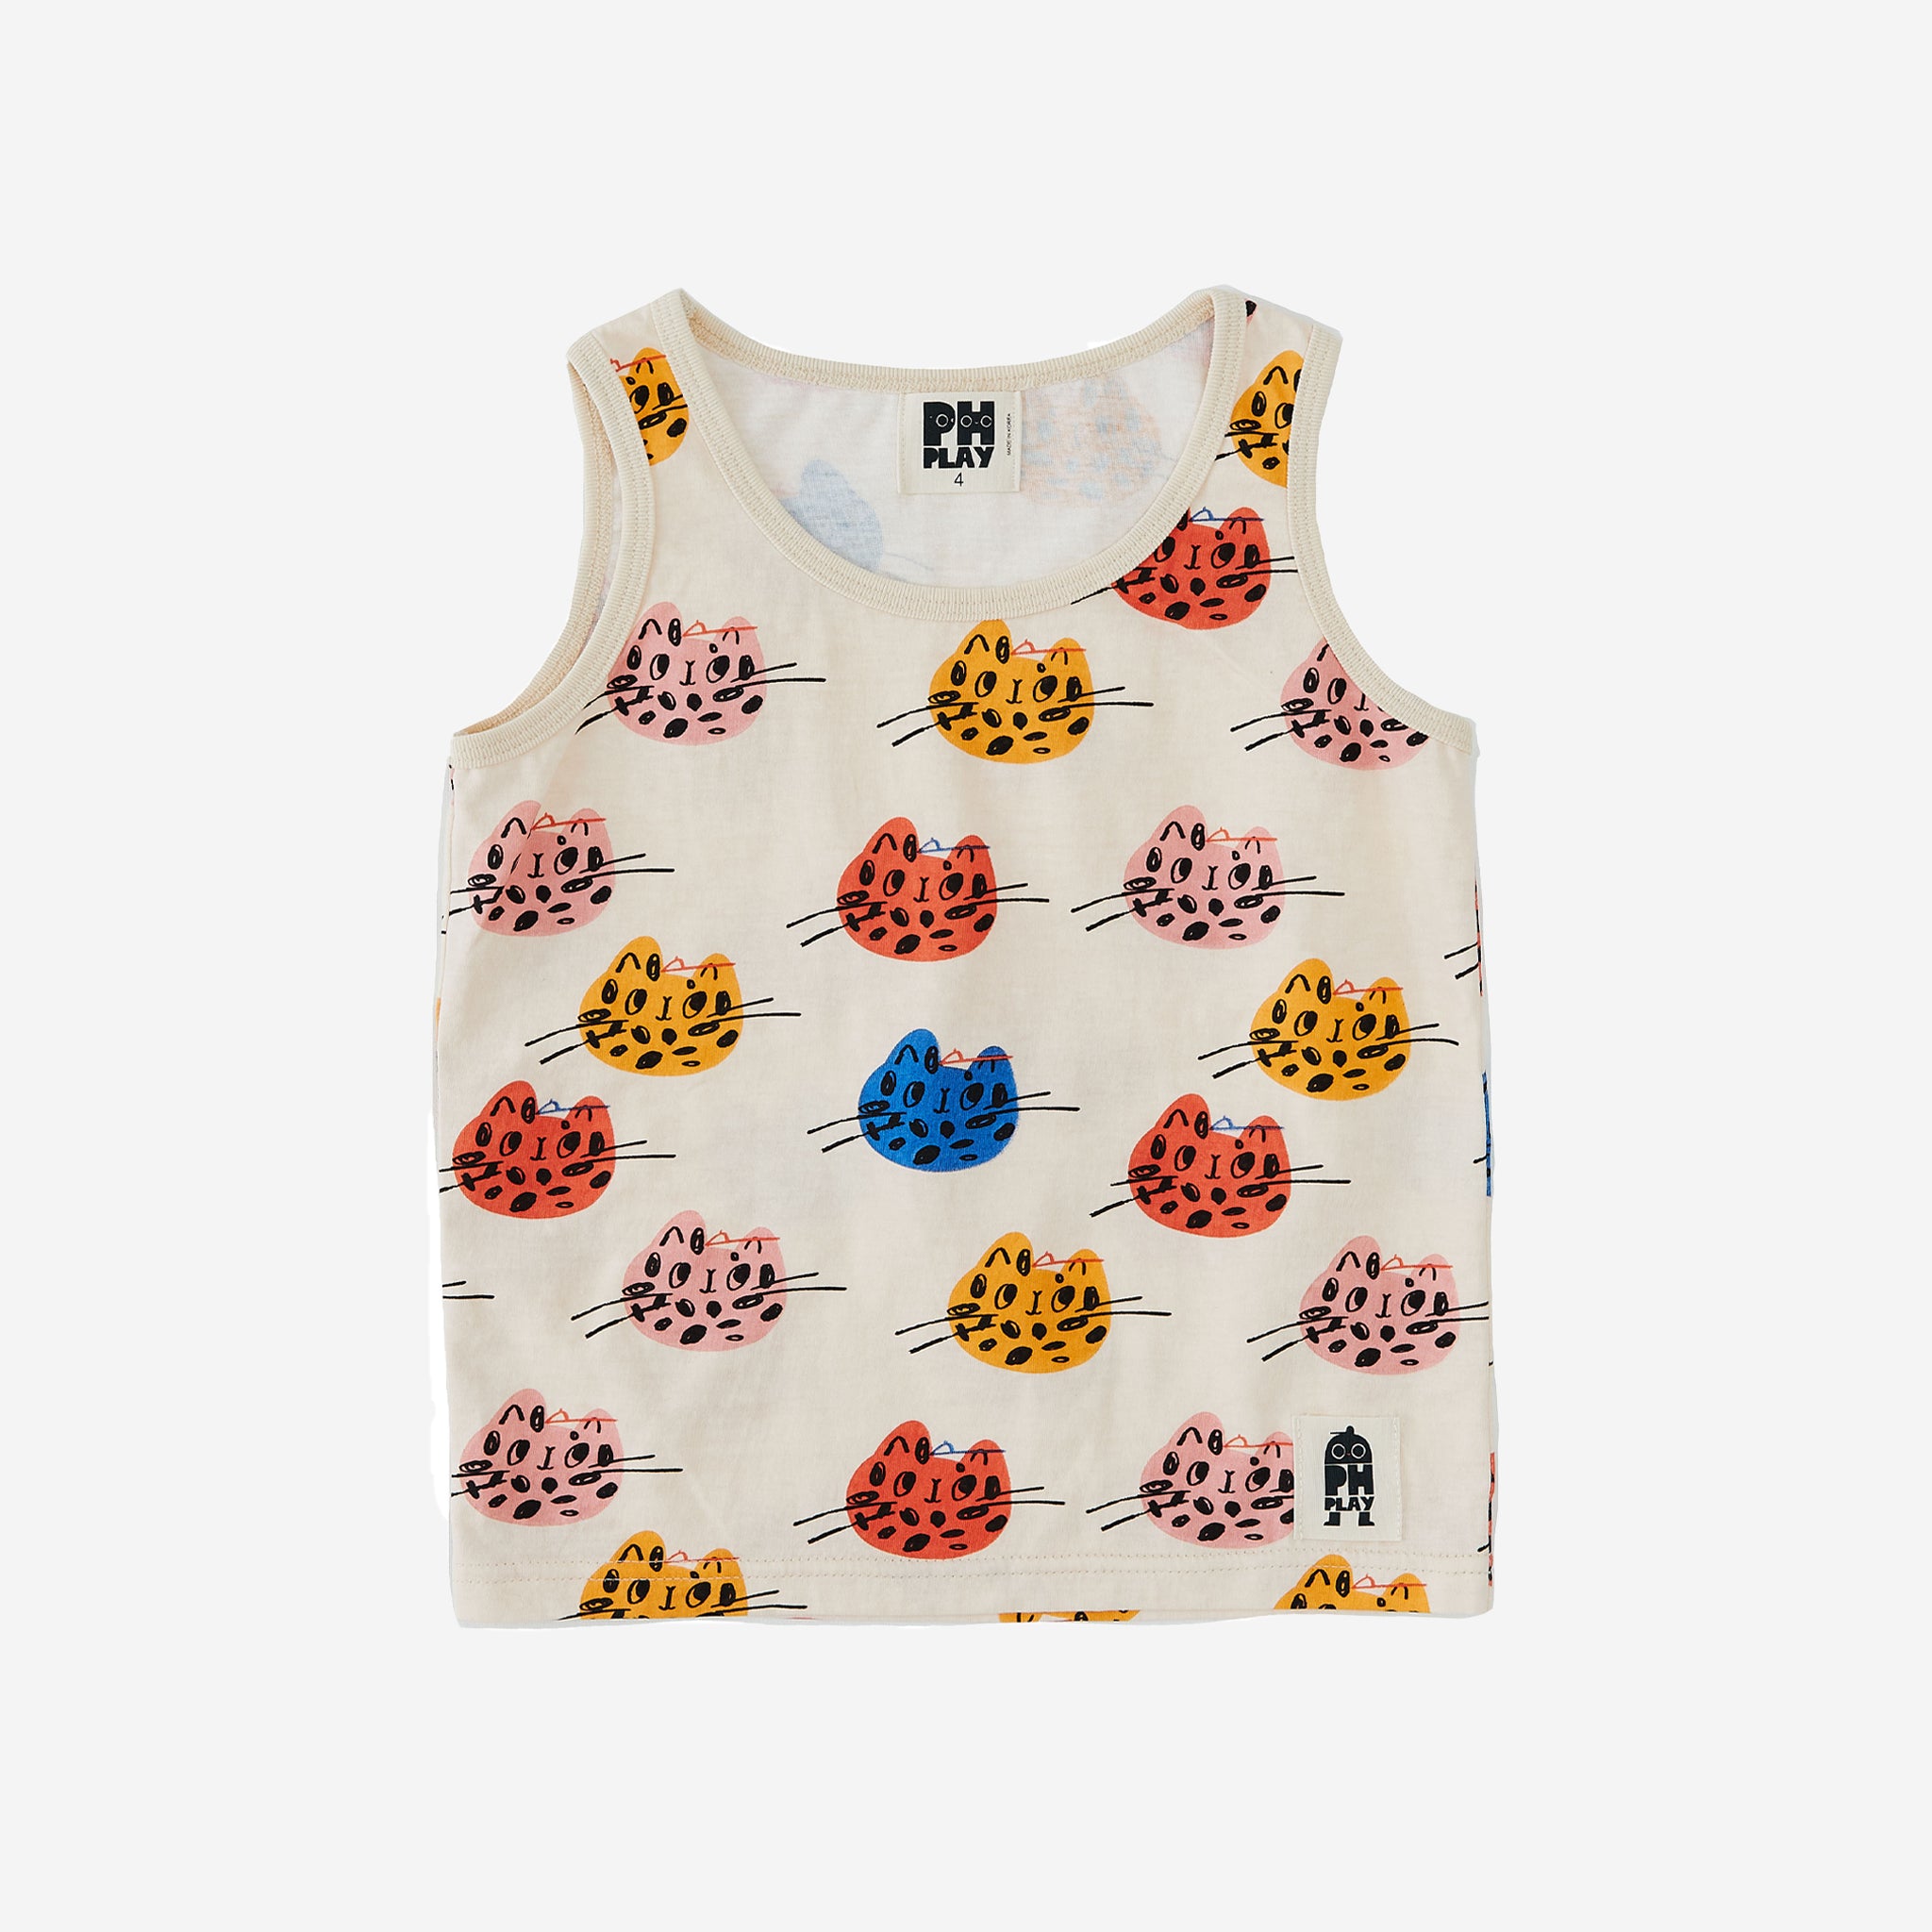 The multi cat print tanktop has a cream background with abstract multi color cat faces